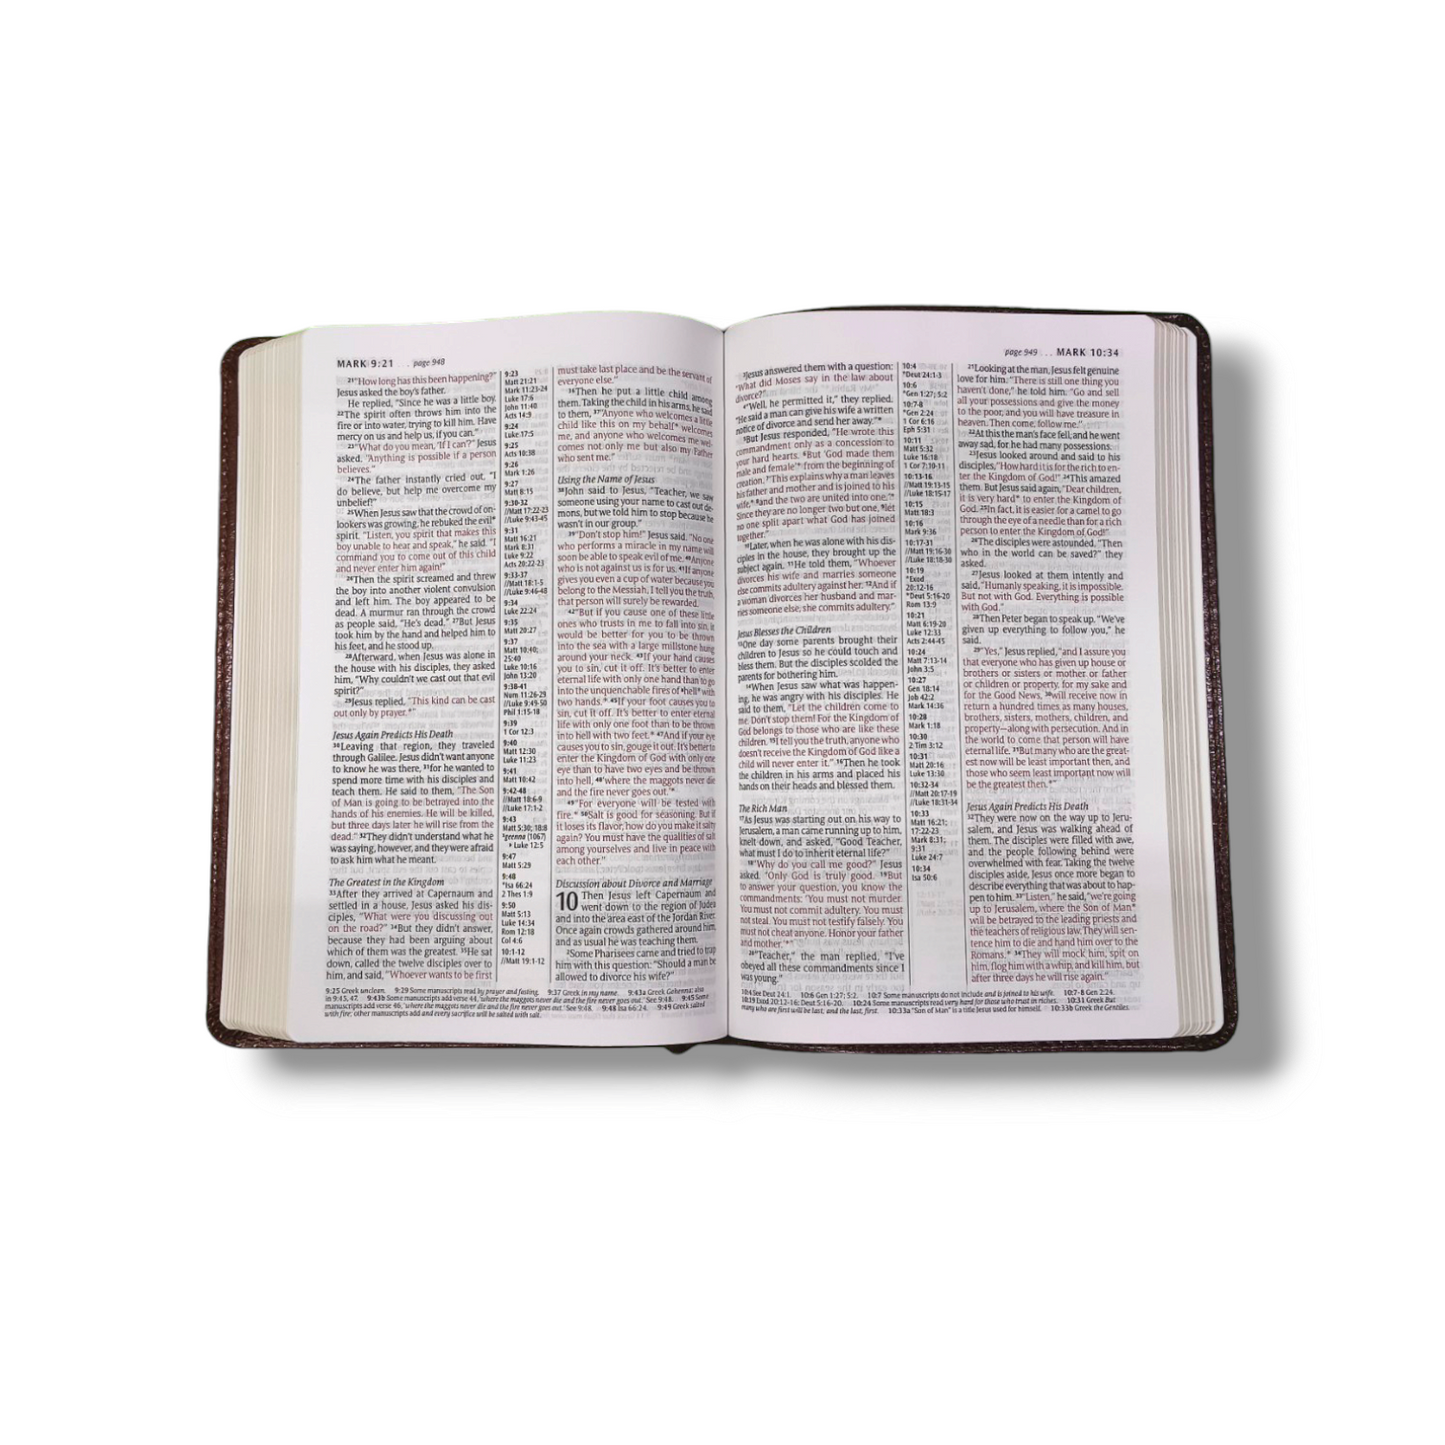 NKJV The Woman's Study Bible | Attractive Red-Blue Leather Edition | Study Bible | New Edition